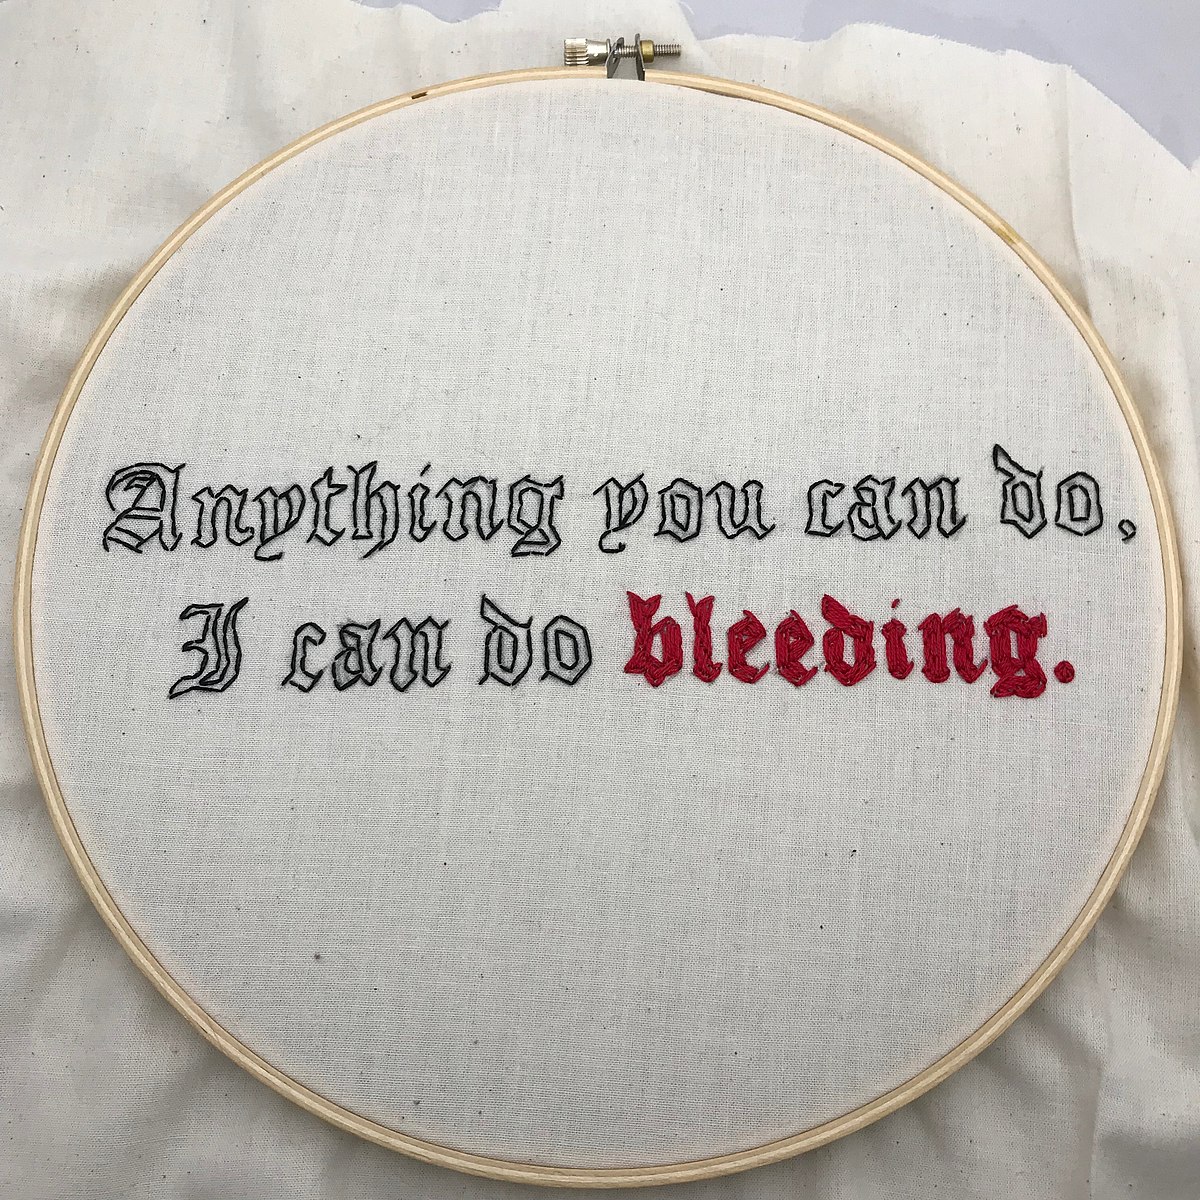 A cross stitch that reads "Anything you can do, I can do bleeding", with the word bleeding in red thread in white linen cloth .